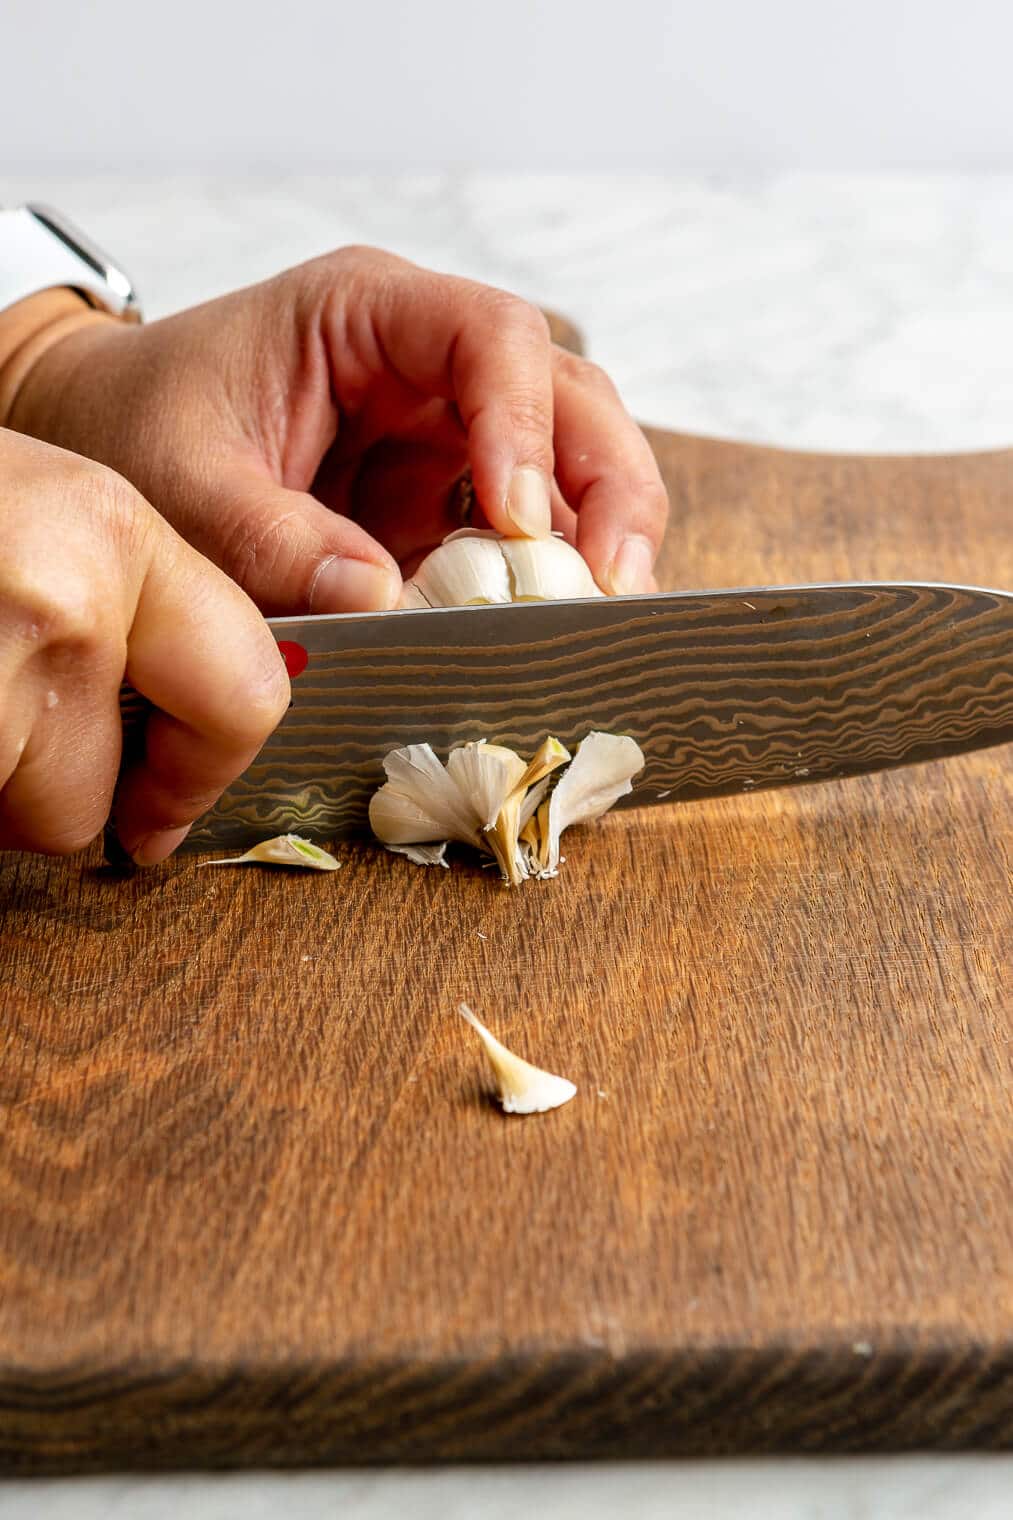 A person chopping off the tip of a bulb of garlic on a wooden cutting board.